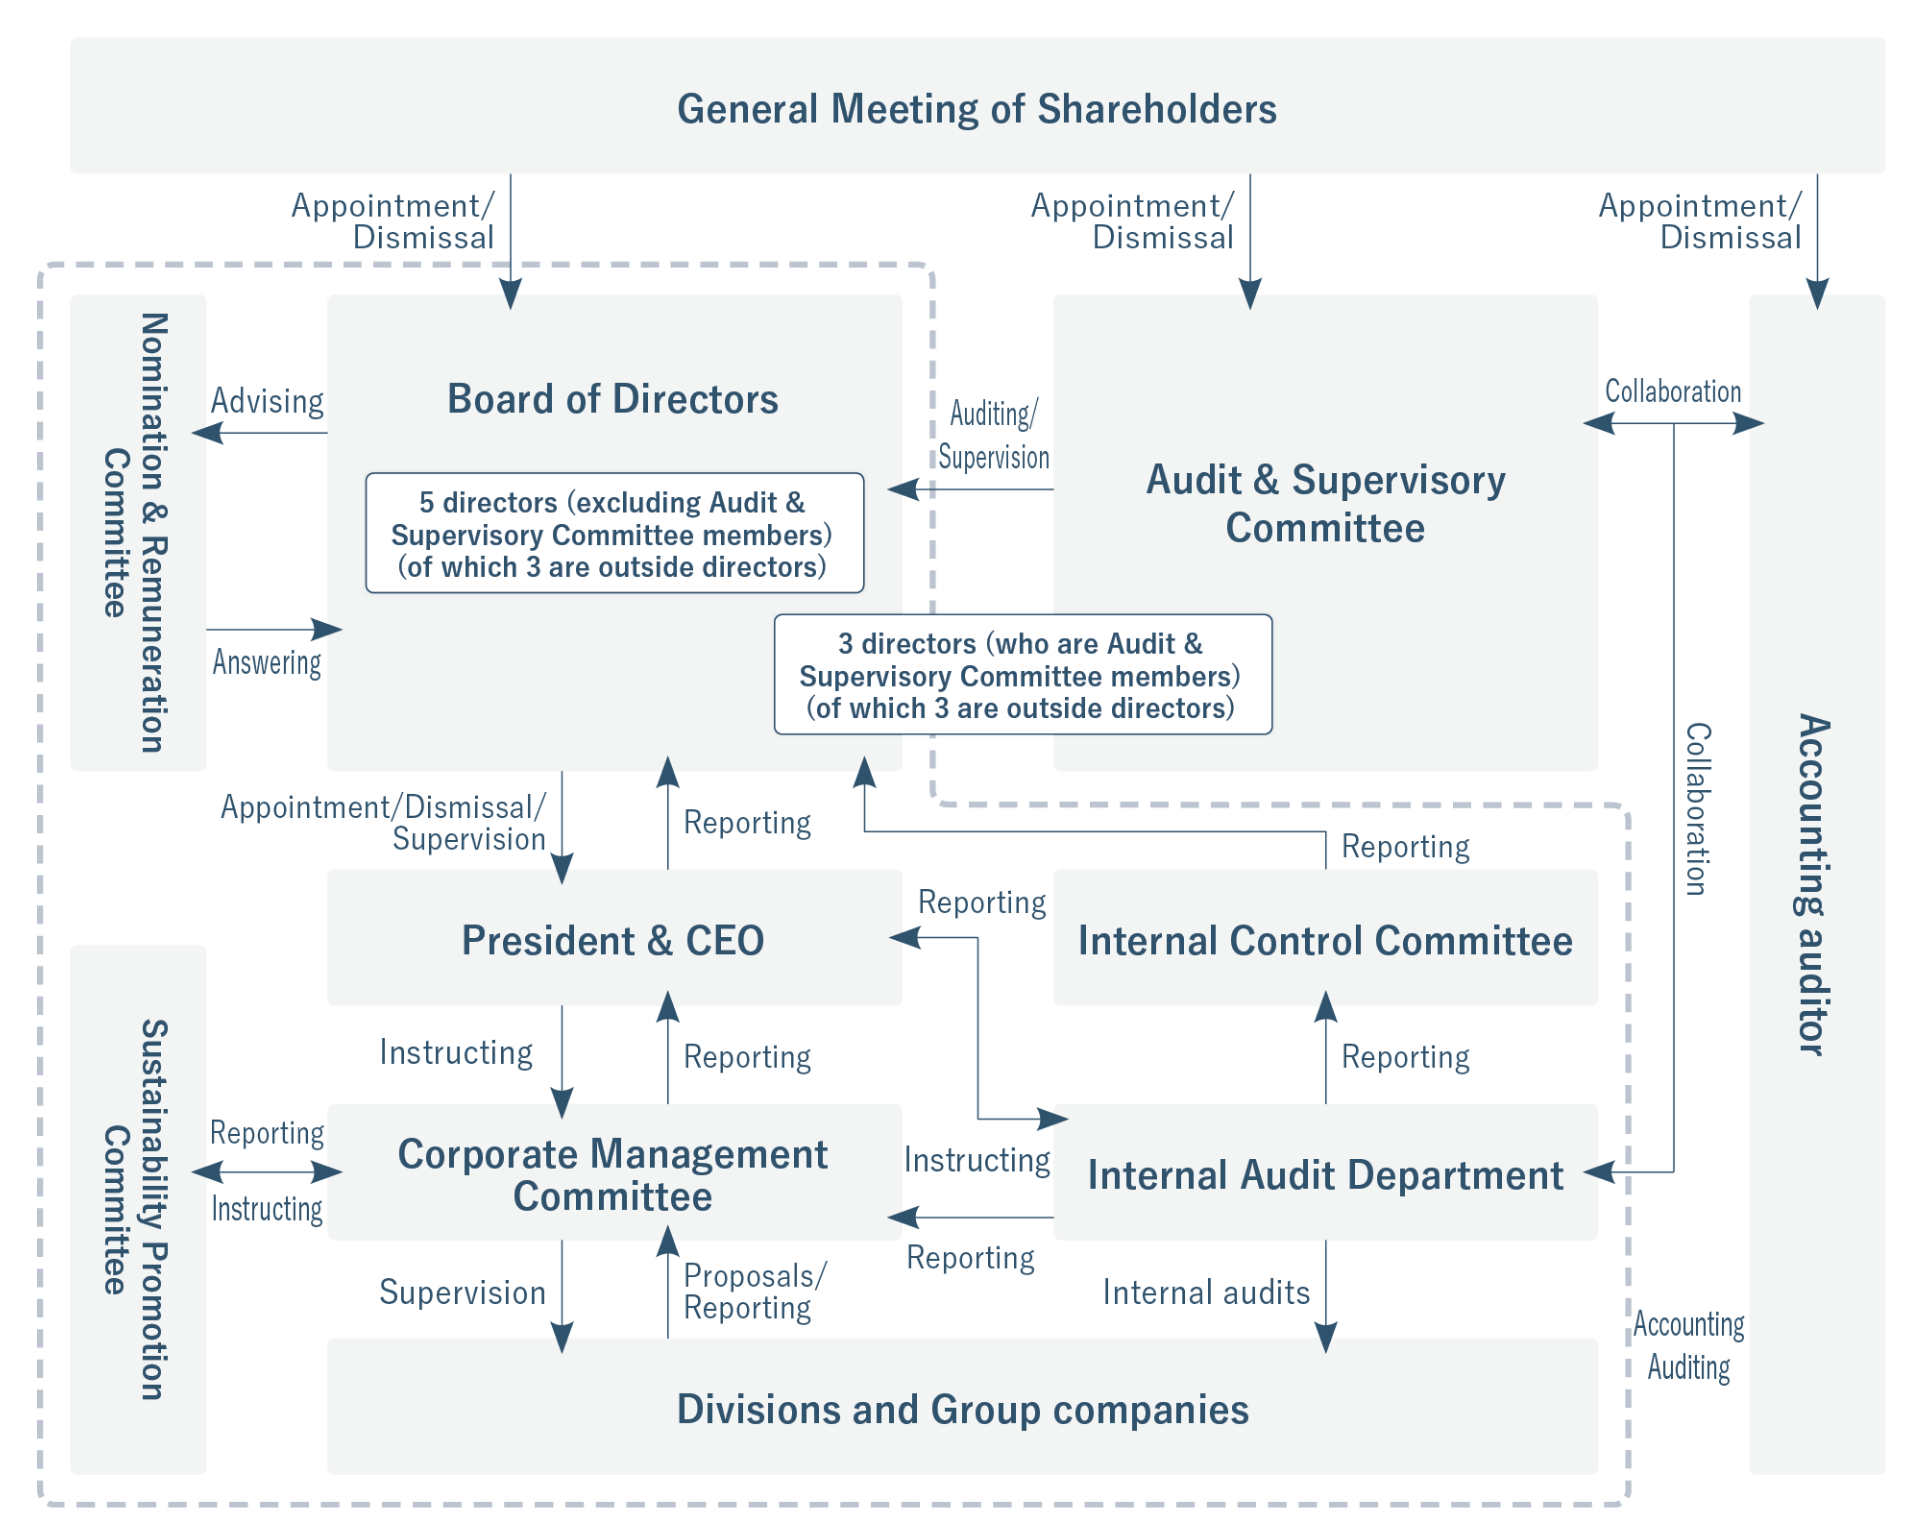 Governance Structure Chart